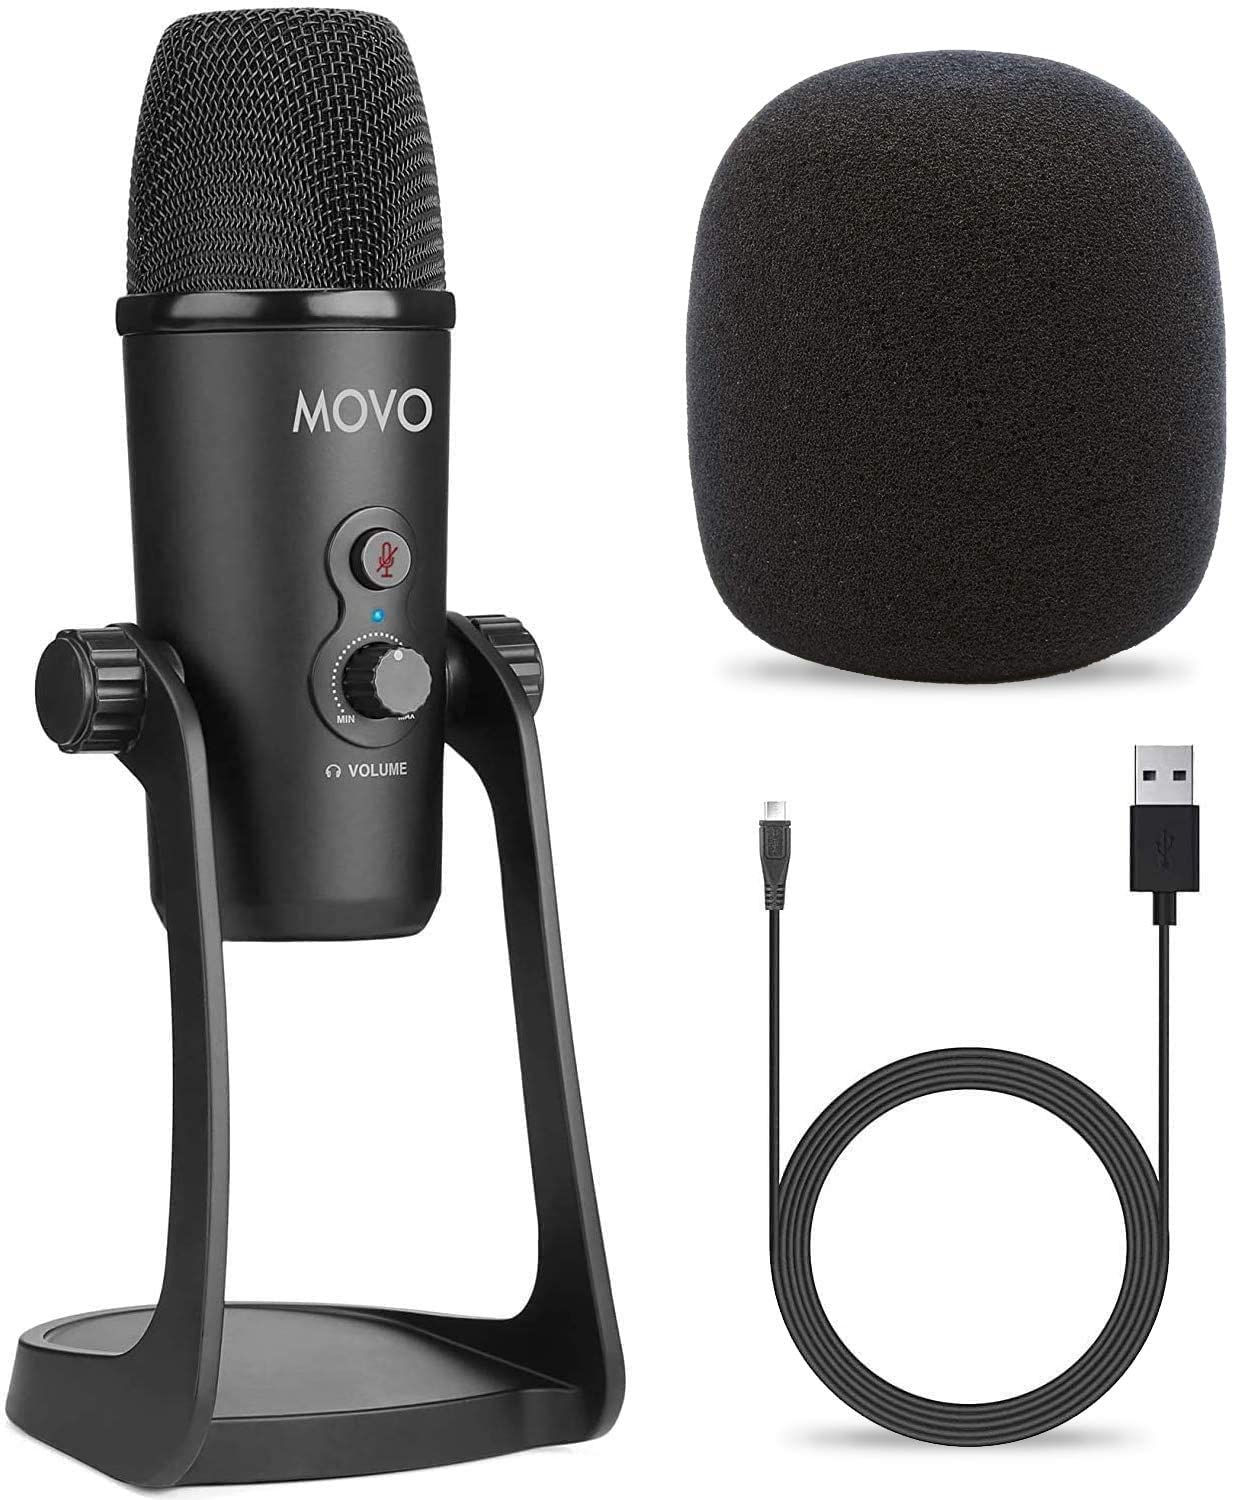 Movo UM700 Desktop USB Microphone for Computer with Adjustable Pickup Patterns Perfect as a Podcast Microphone, Streaming Microphone, Gaming Microphone, and More